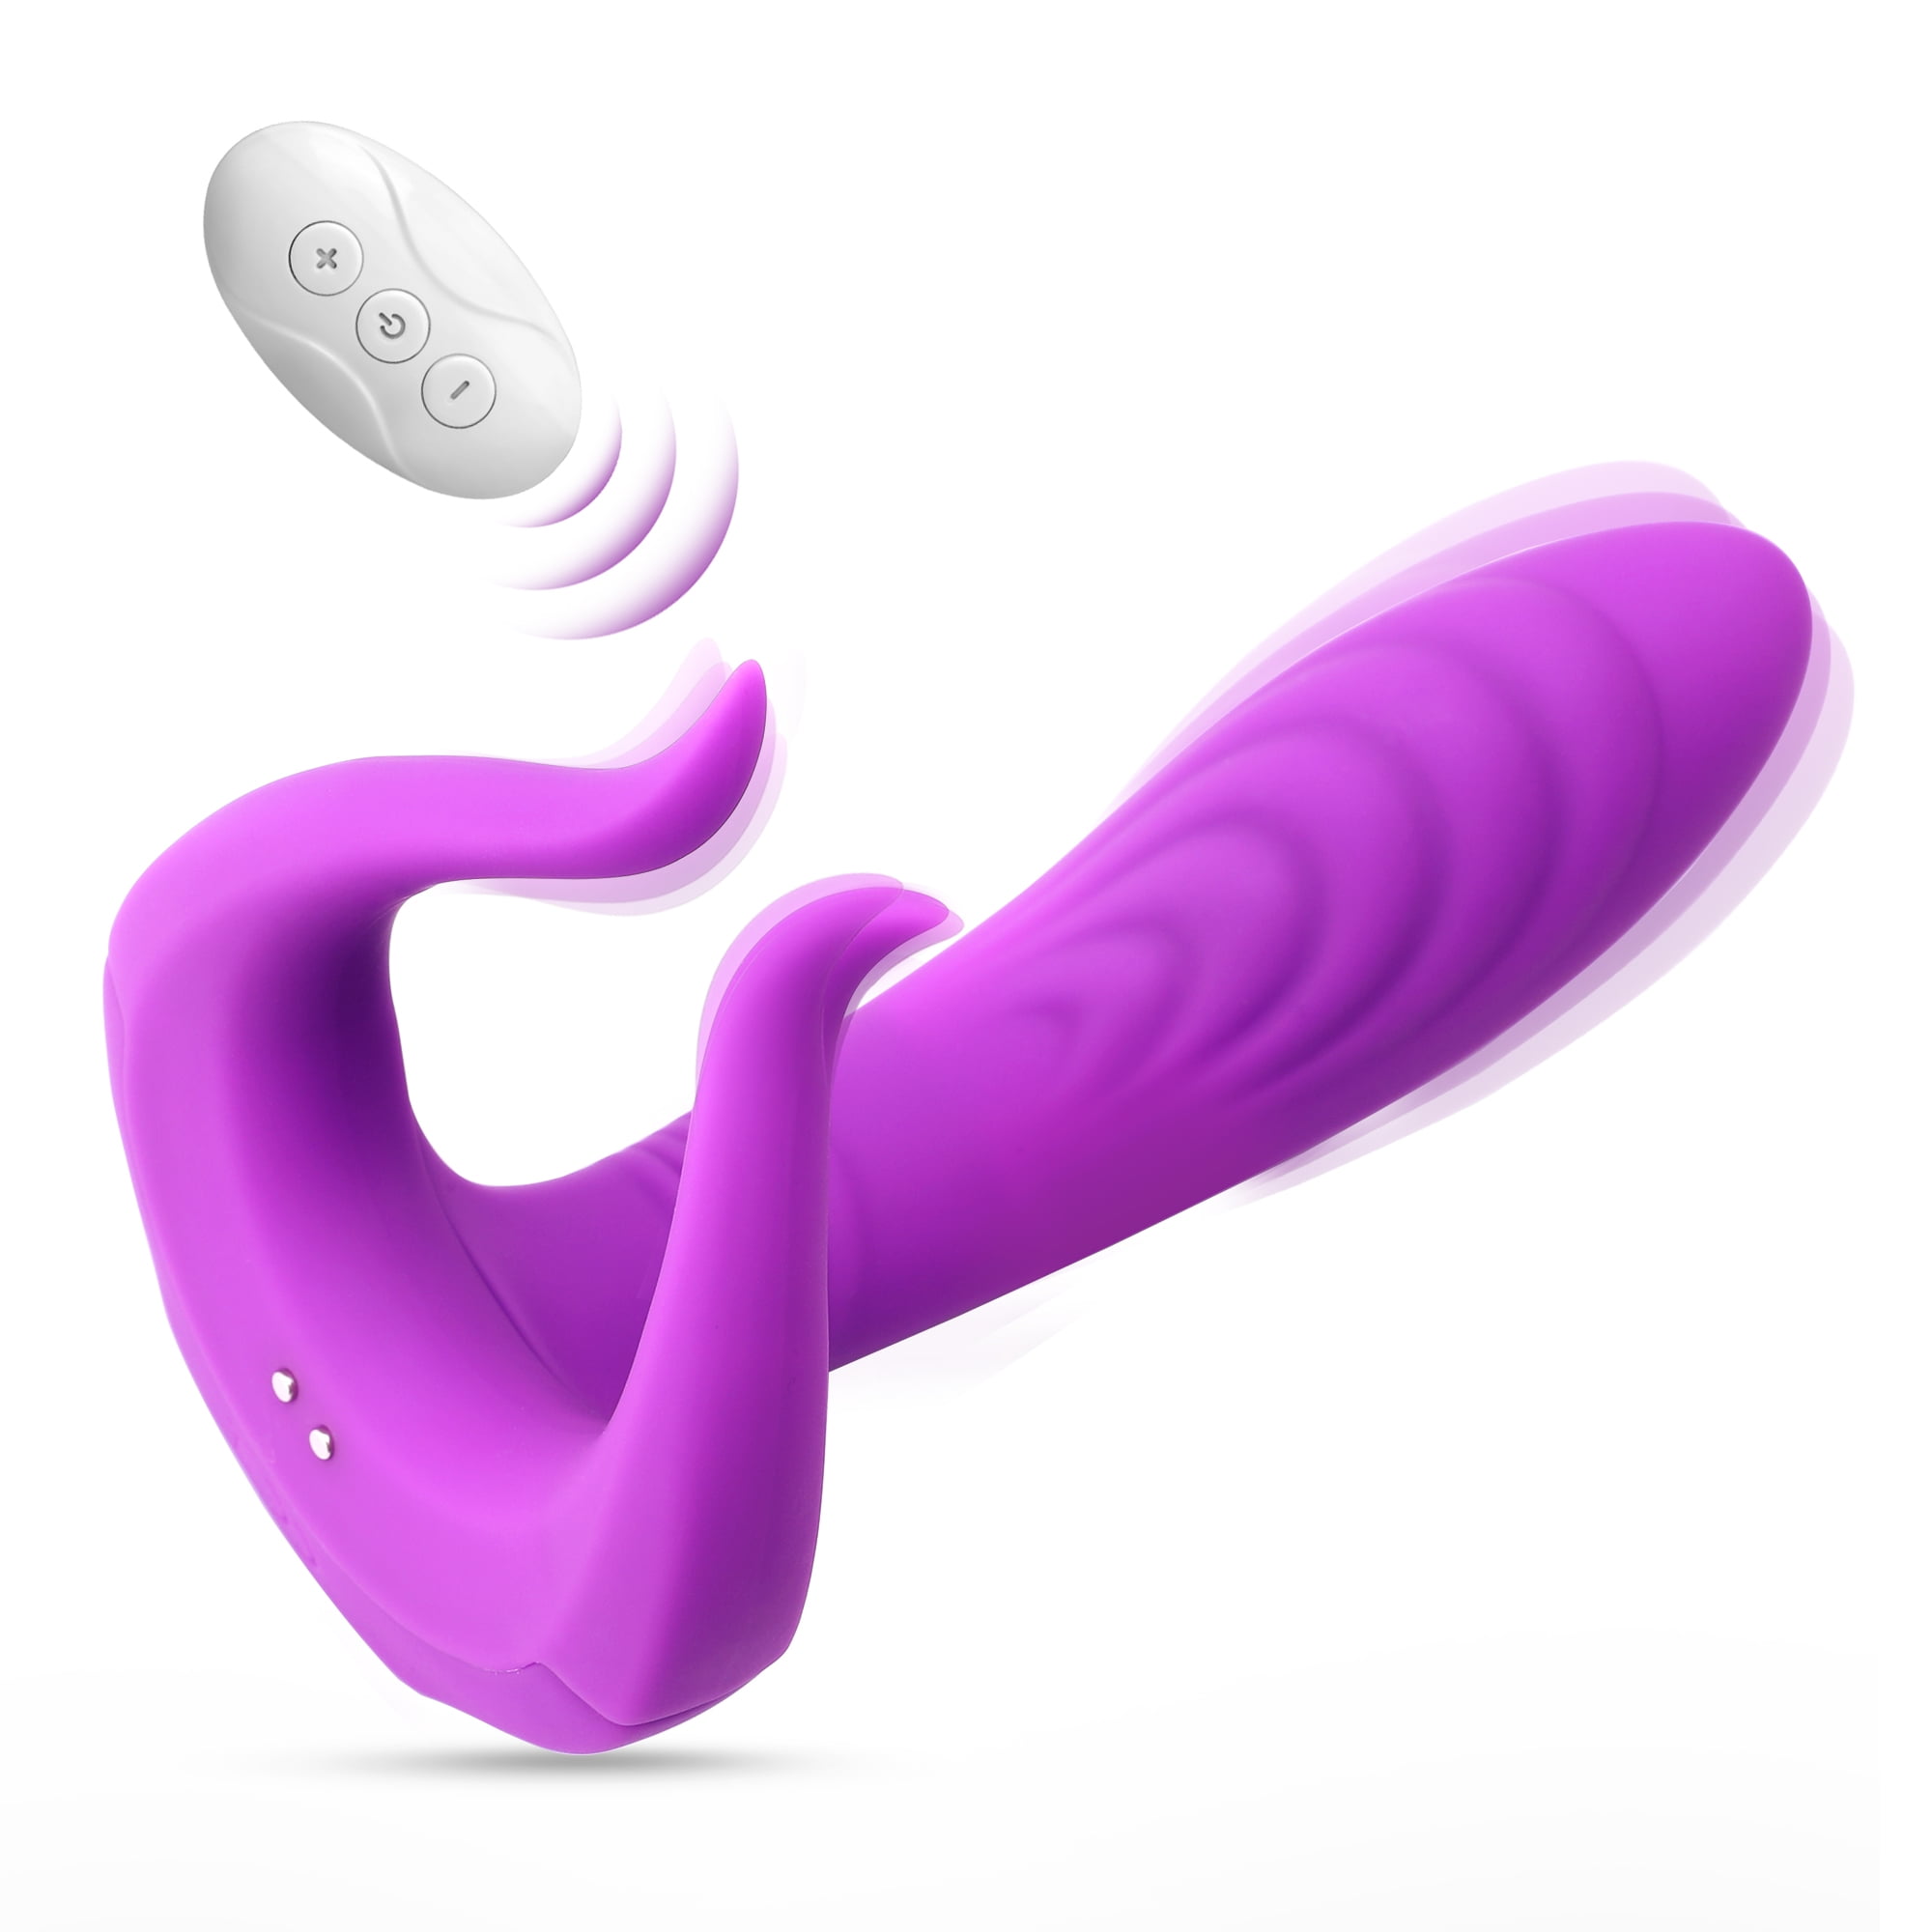 G-spot Dildo Vibrator with Remote Control, 3 IN 1 Nipple Clitoris Anal Stimulator with 10 Vibration Modes, Adult sex toys for Women, Men, Couple pic